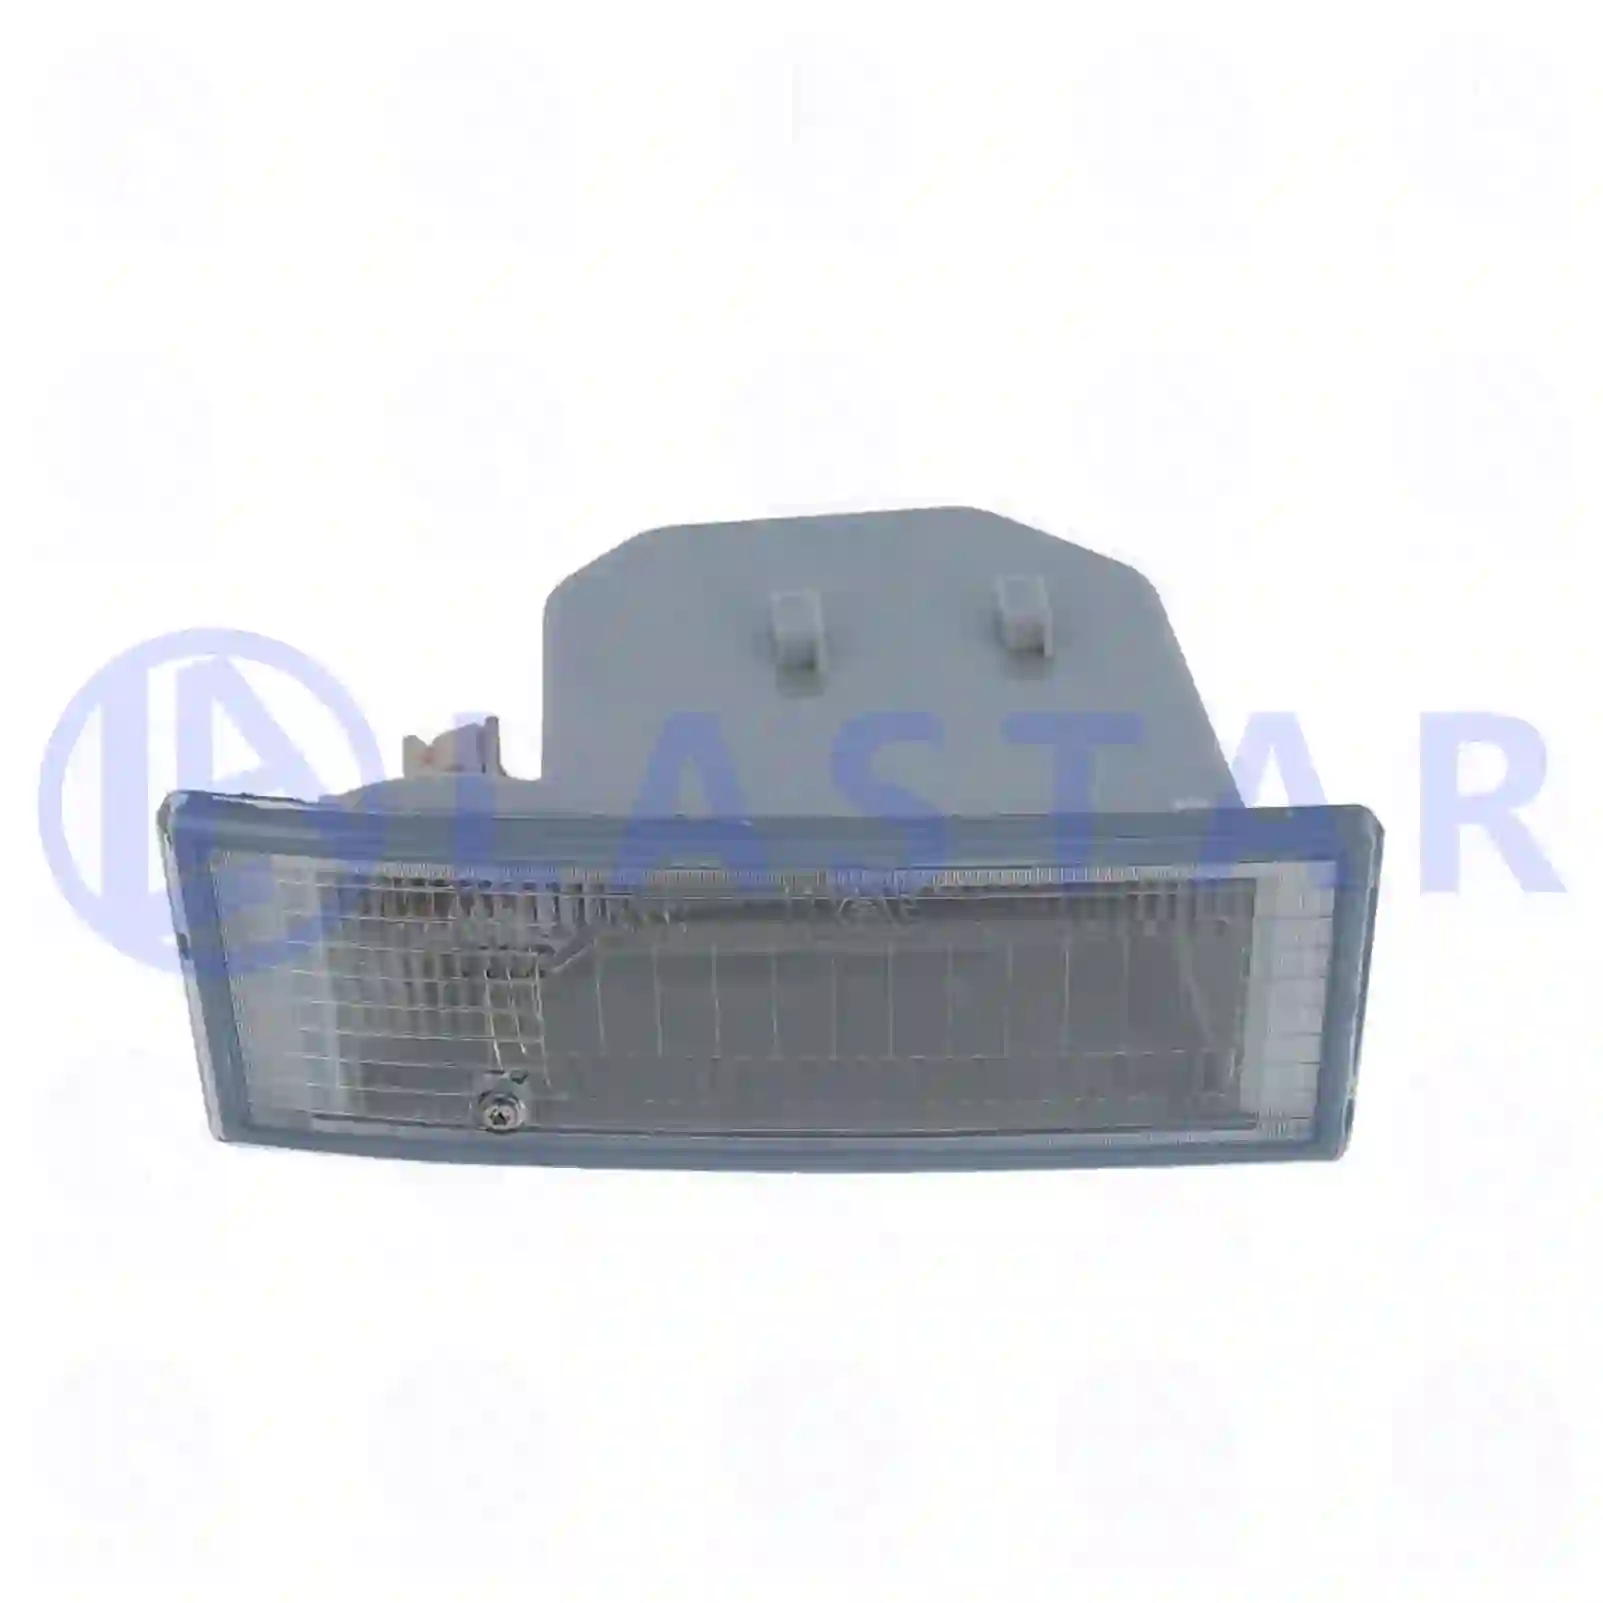 Fog lamp, right, with bulb, 77710844, 1063222, 20360274, 3980335, ZG20425-0008 ||  77710844 Lastar Spare Part | Truck Spare Parts, Auotomotive Spare Parts Fog lamp, right, with bulb, 77710844, 1063222, 20360274, 3980335, ZG20425-0008 ||  77710844 Lastar Spare Part | Truck Spare Parts, Auotomotive Spare Parts